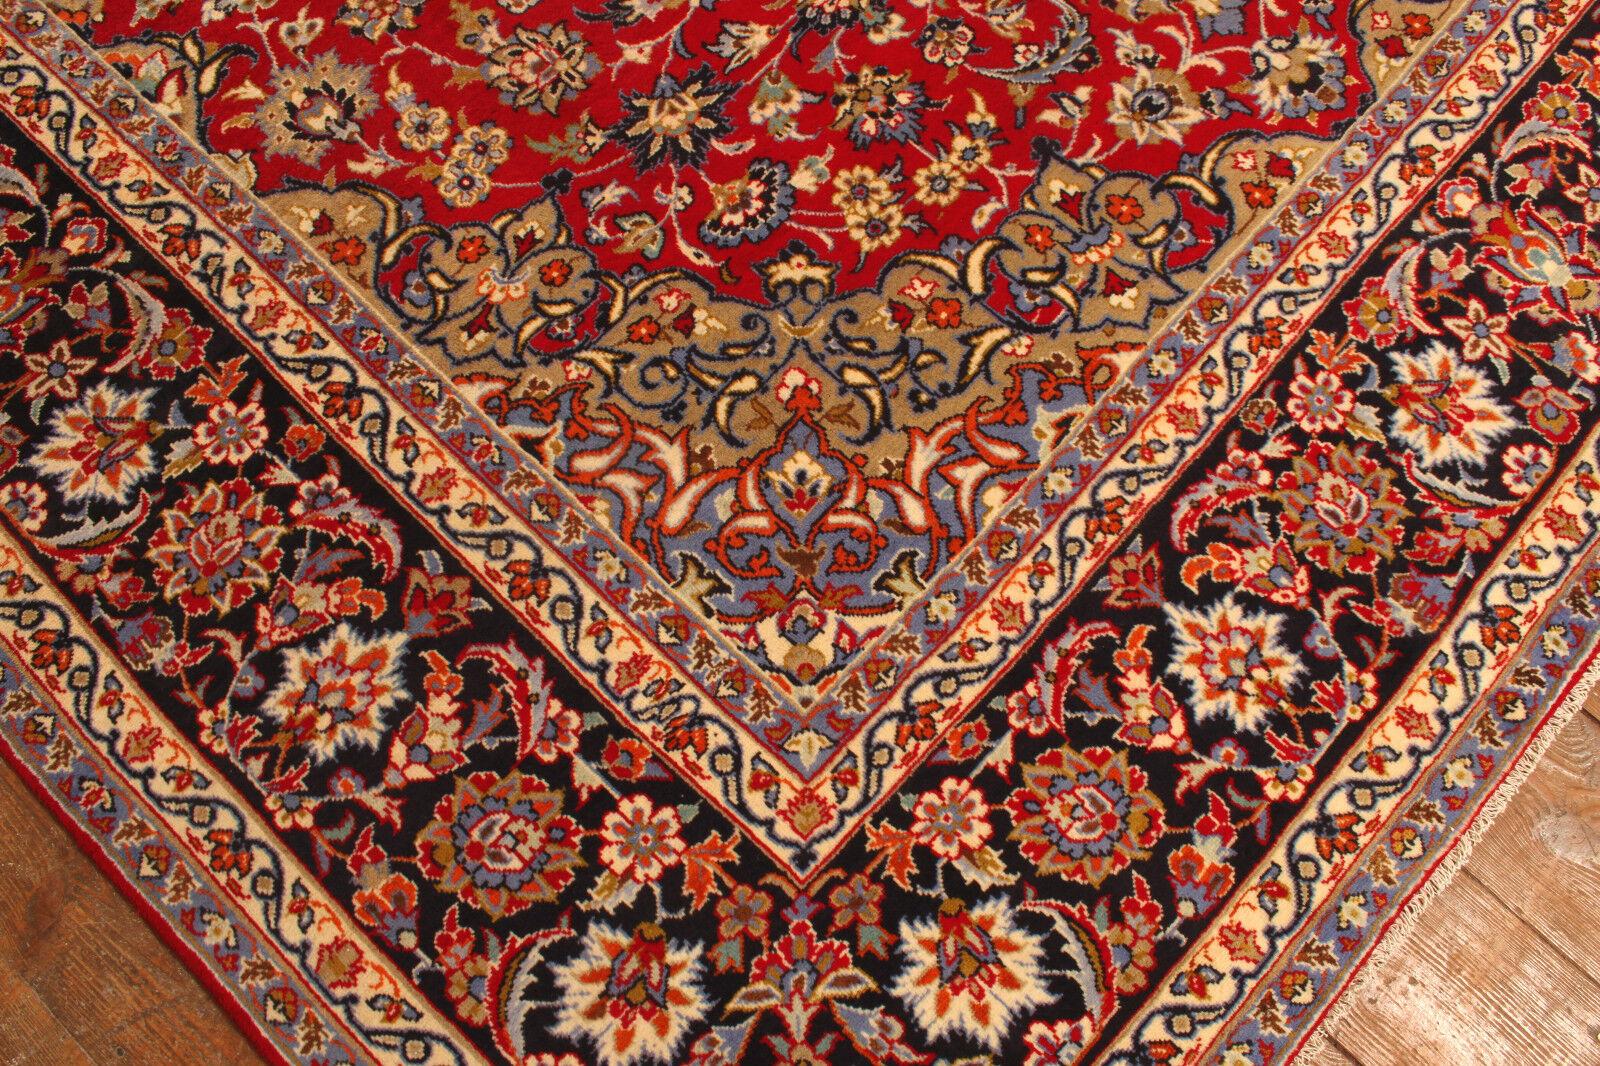 Mid-20th Century Handmade Vintage Persian Style Kashan Rug 9.6' x 14.1', 1960s - 1T15 For Sale